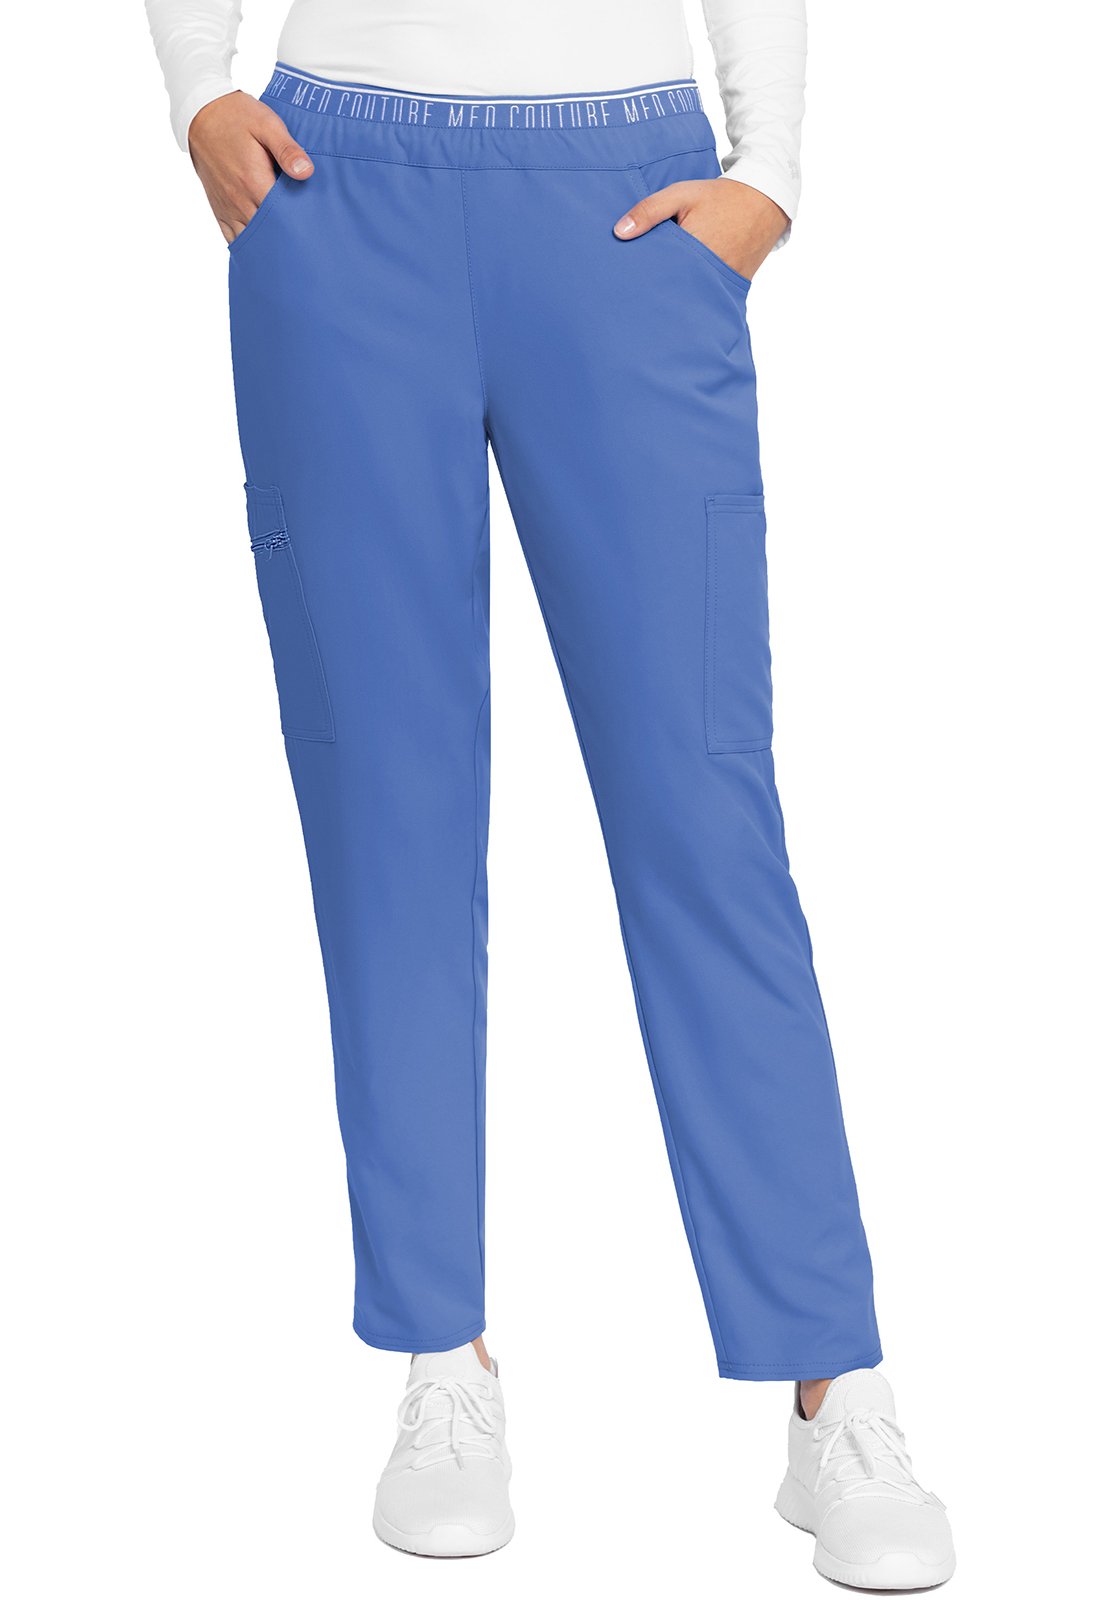 Med Couture MC Insight Ciel / 3XL MC Insight  Mid-rise Tapered Leg Pull-on Pant MC009